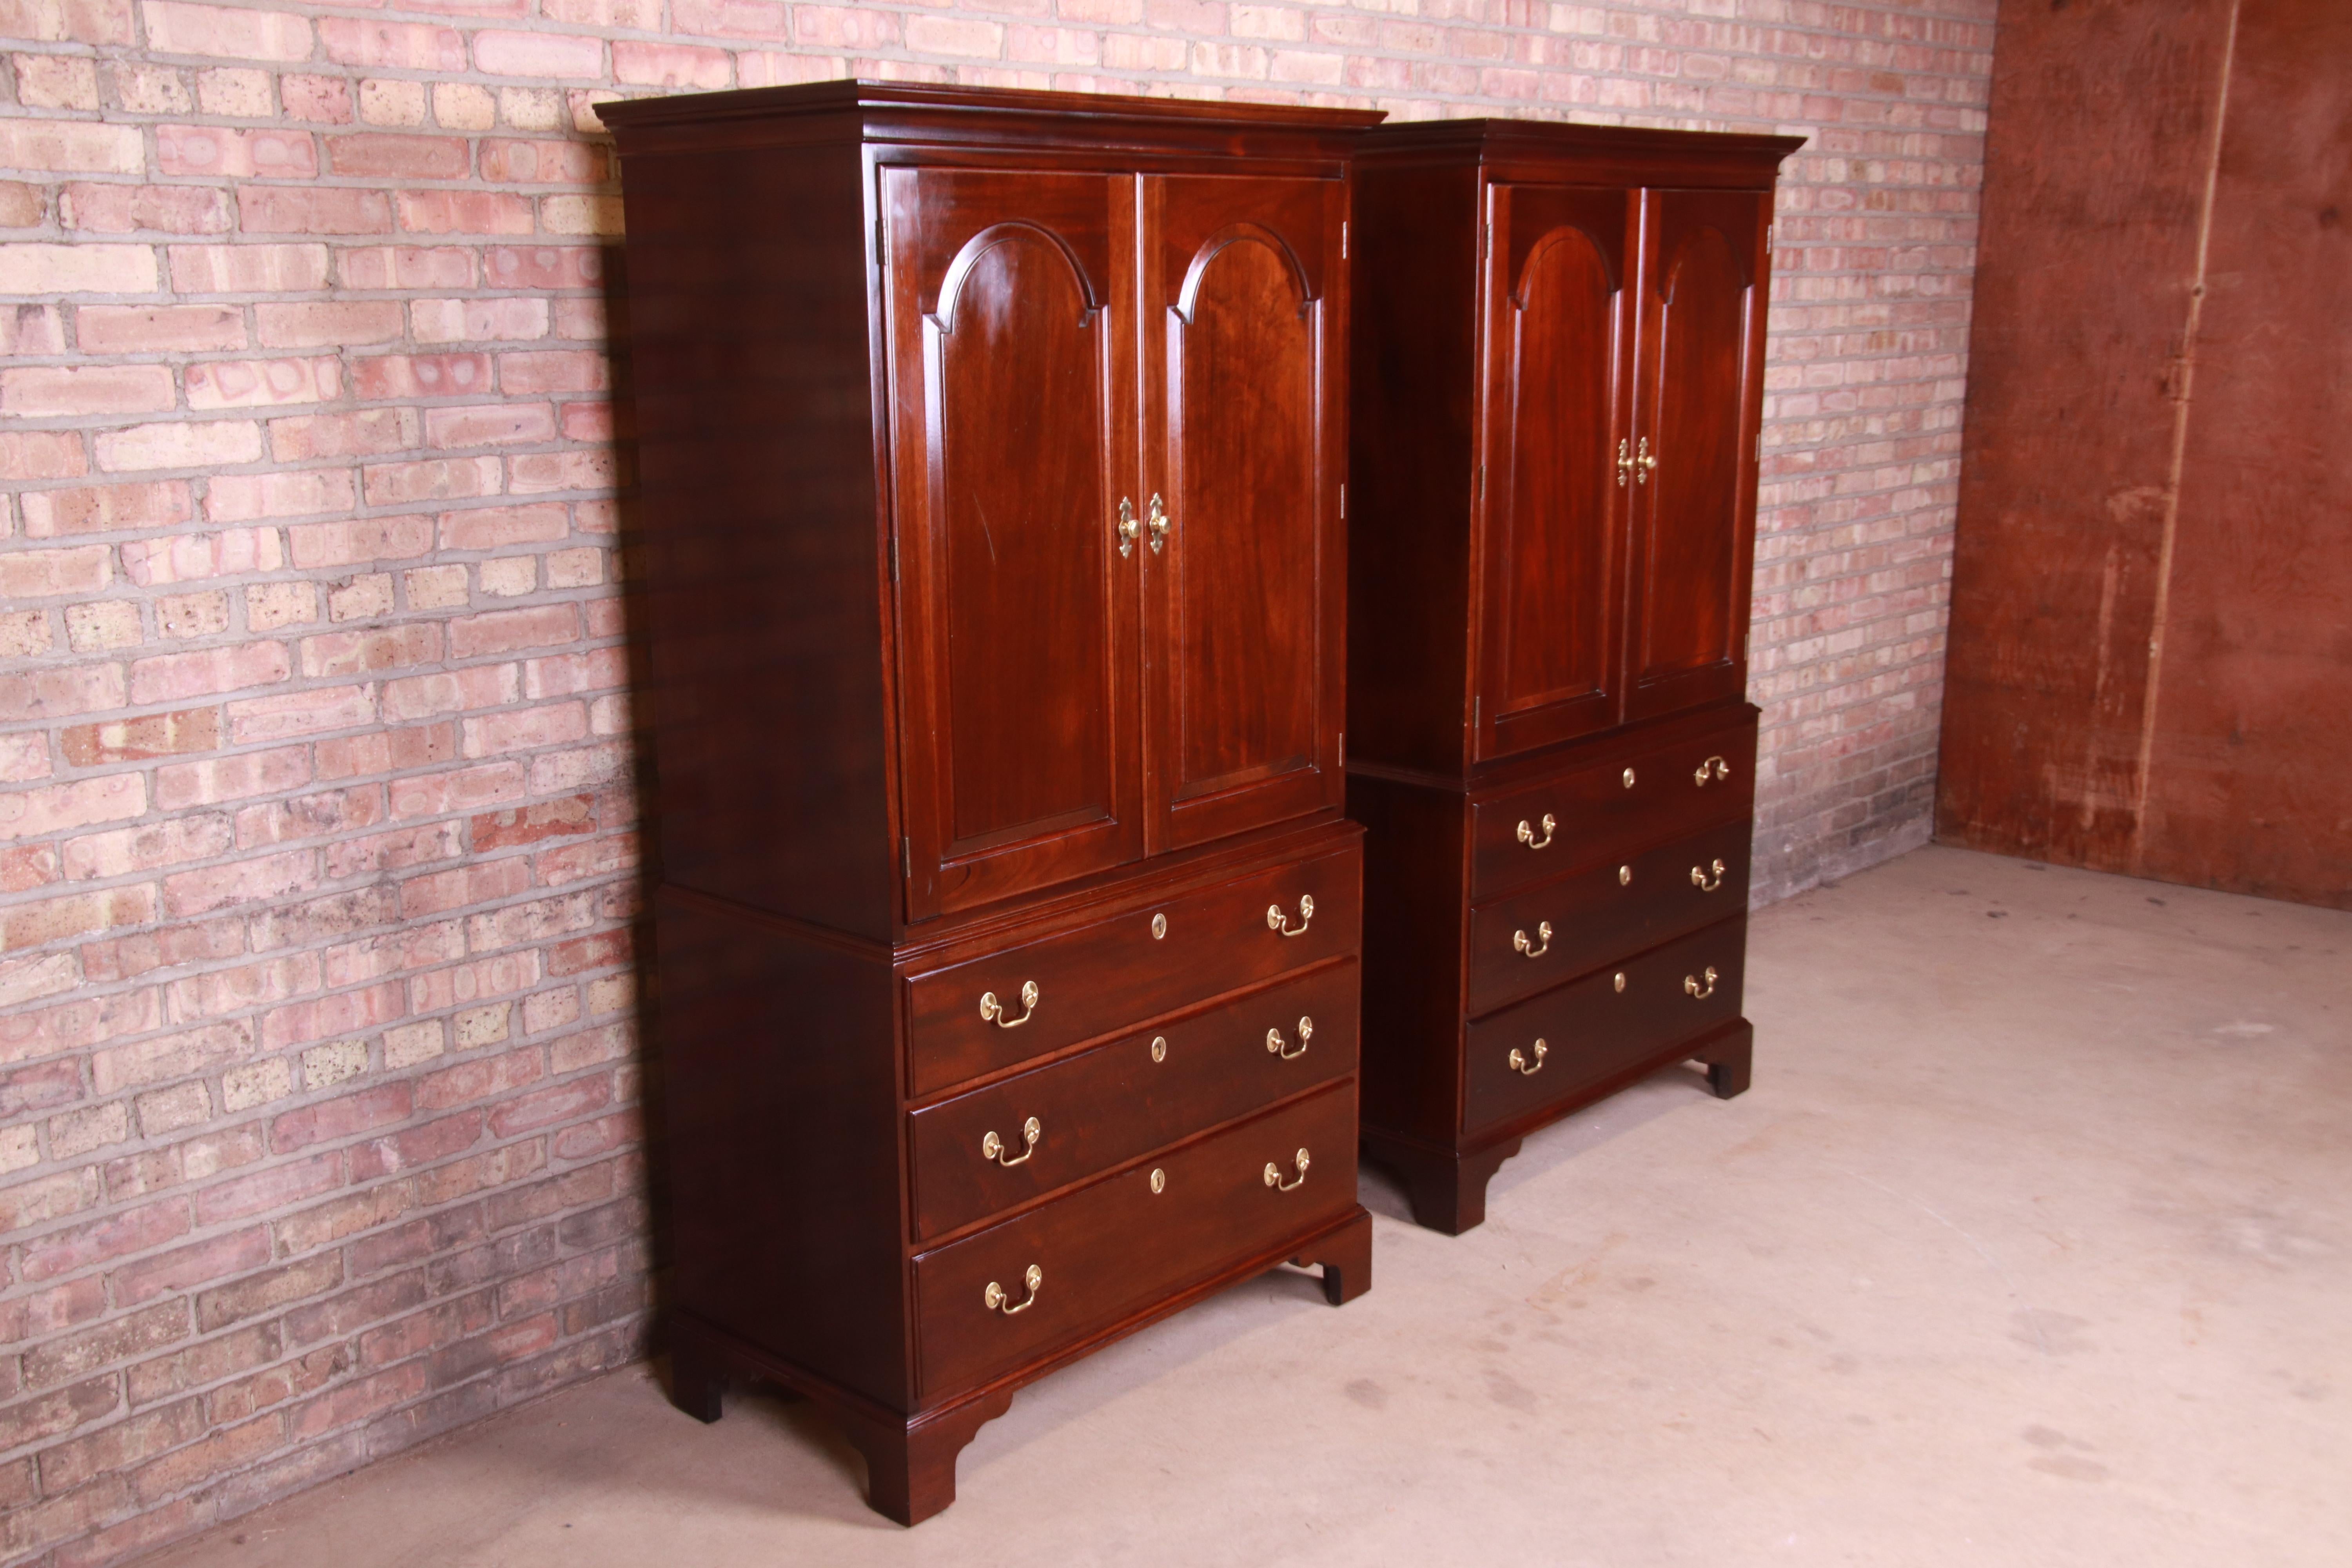 Brass Stickley Chippendale Mahogany Gentleman's Chests, Pair